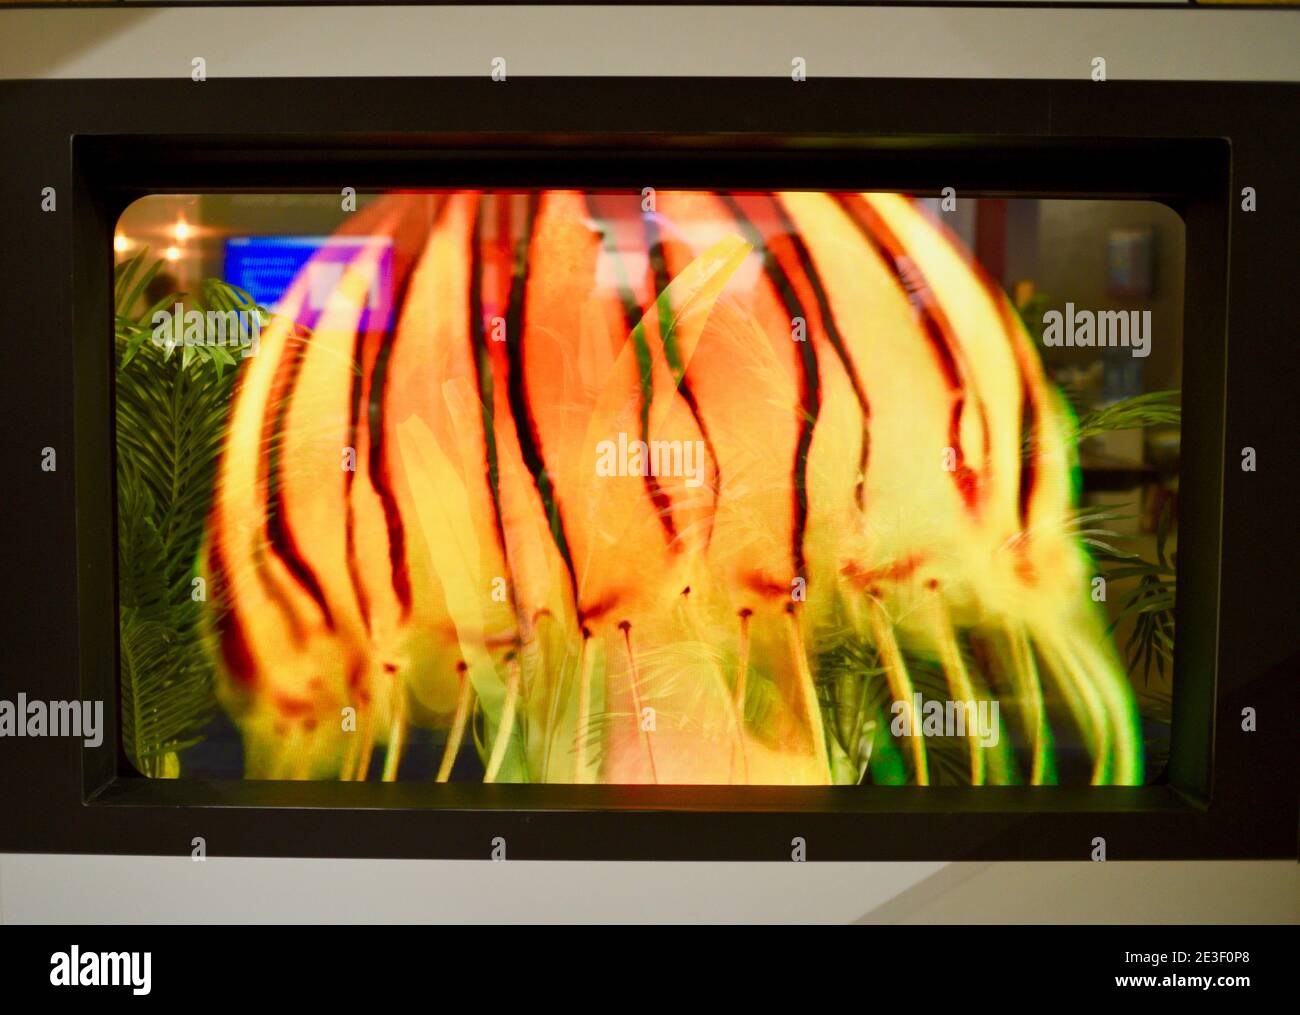 Panasonic transparent OLED glass display module, showcased in exhibit booth at CES, world's largest trade show Las Vegas, NV, USA Stock Photo